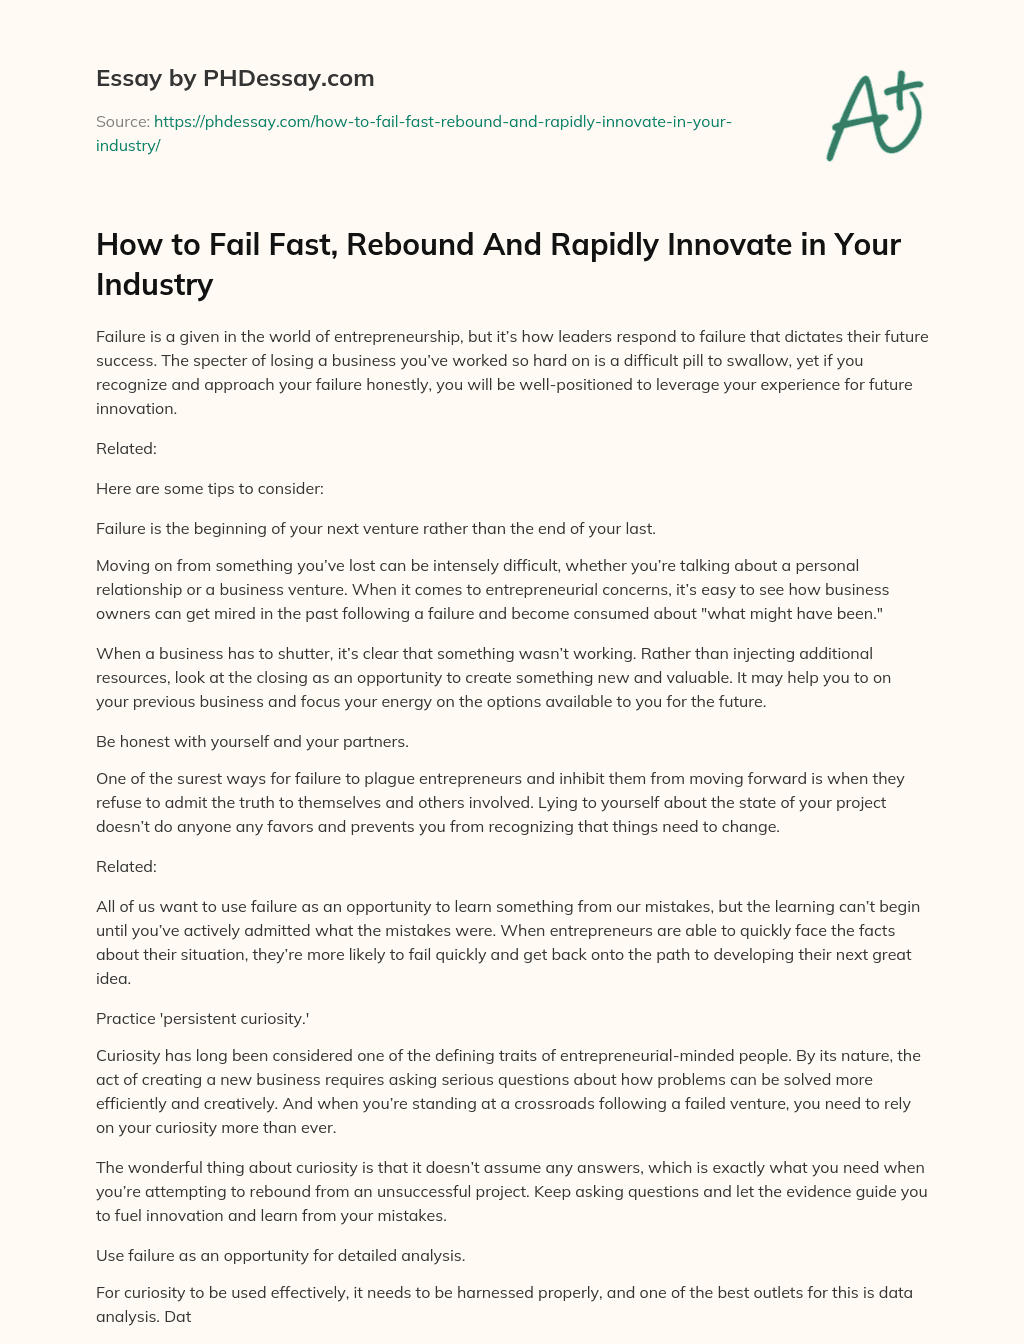 How to Fail Fast, Rebound And Rapidly Innovate in Your Industry essay